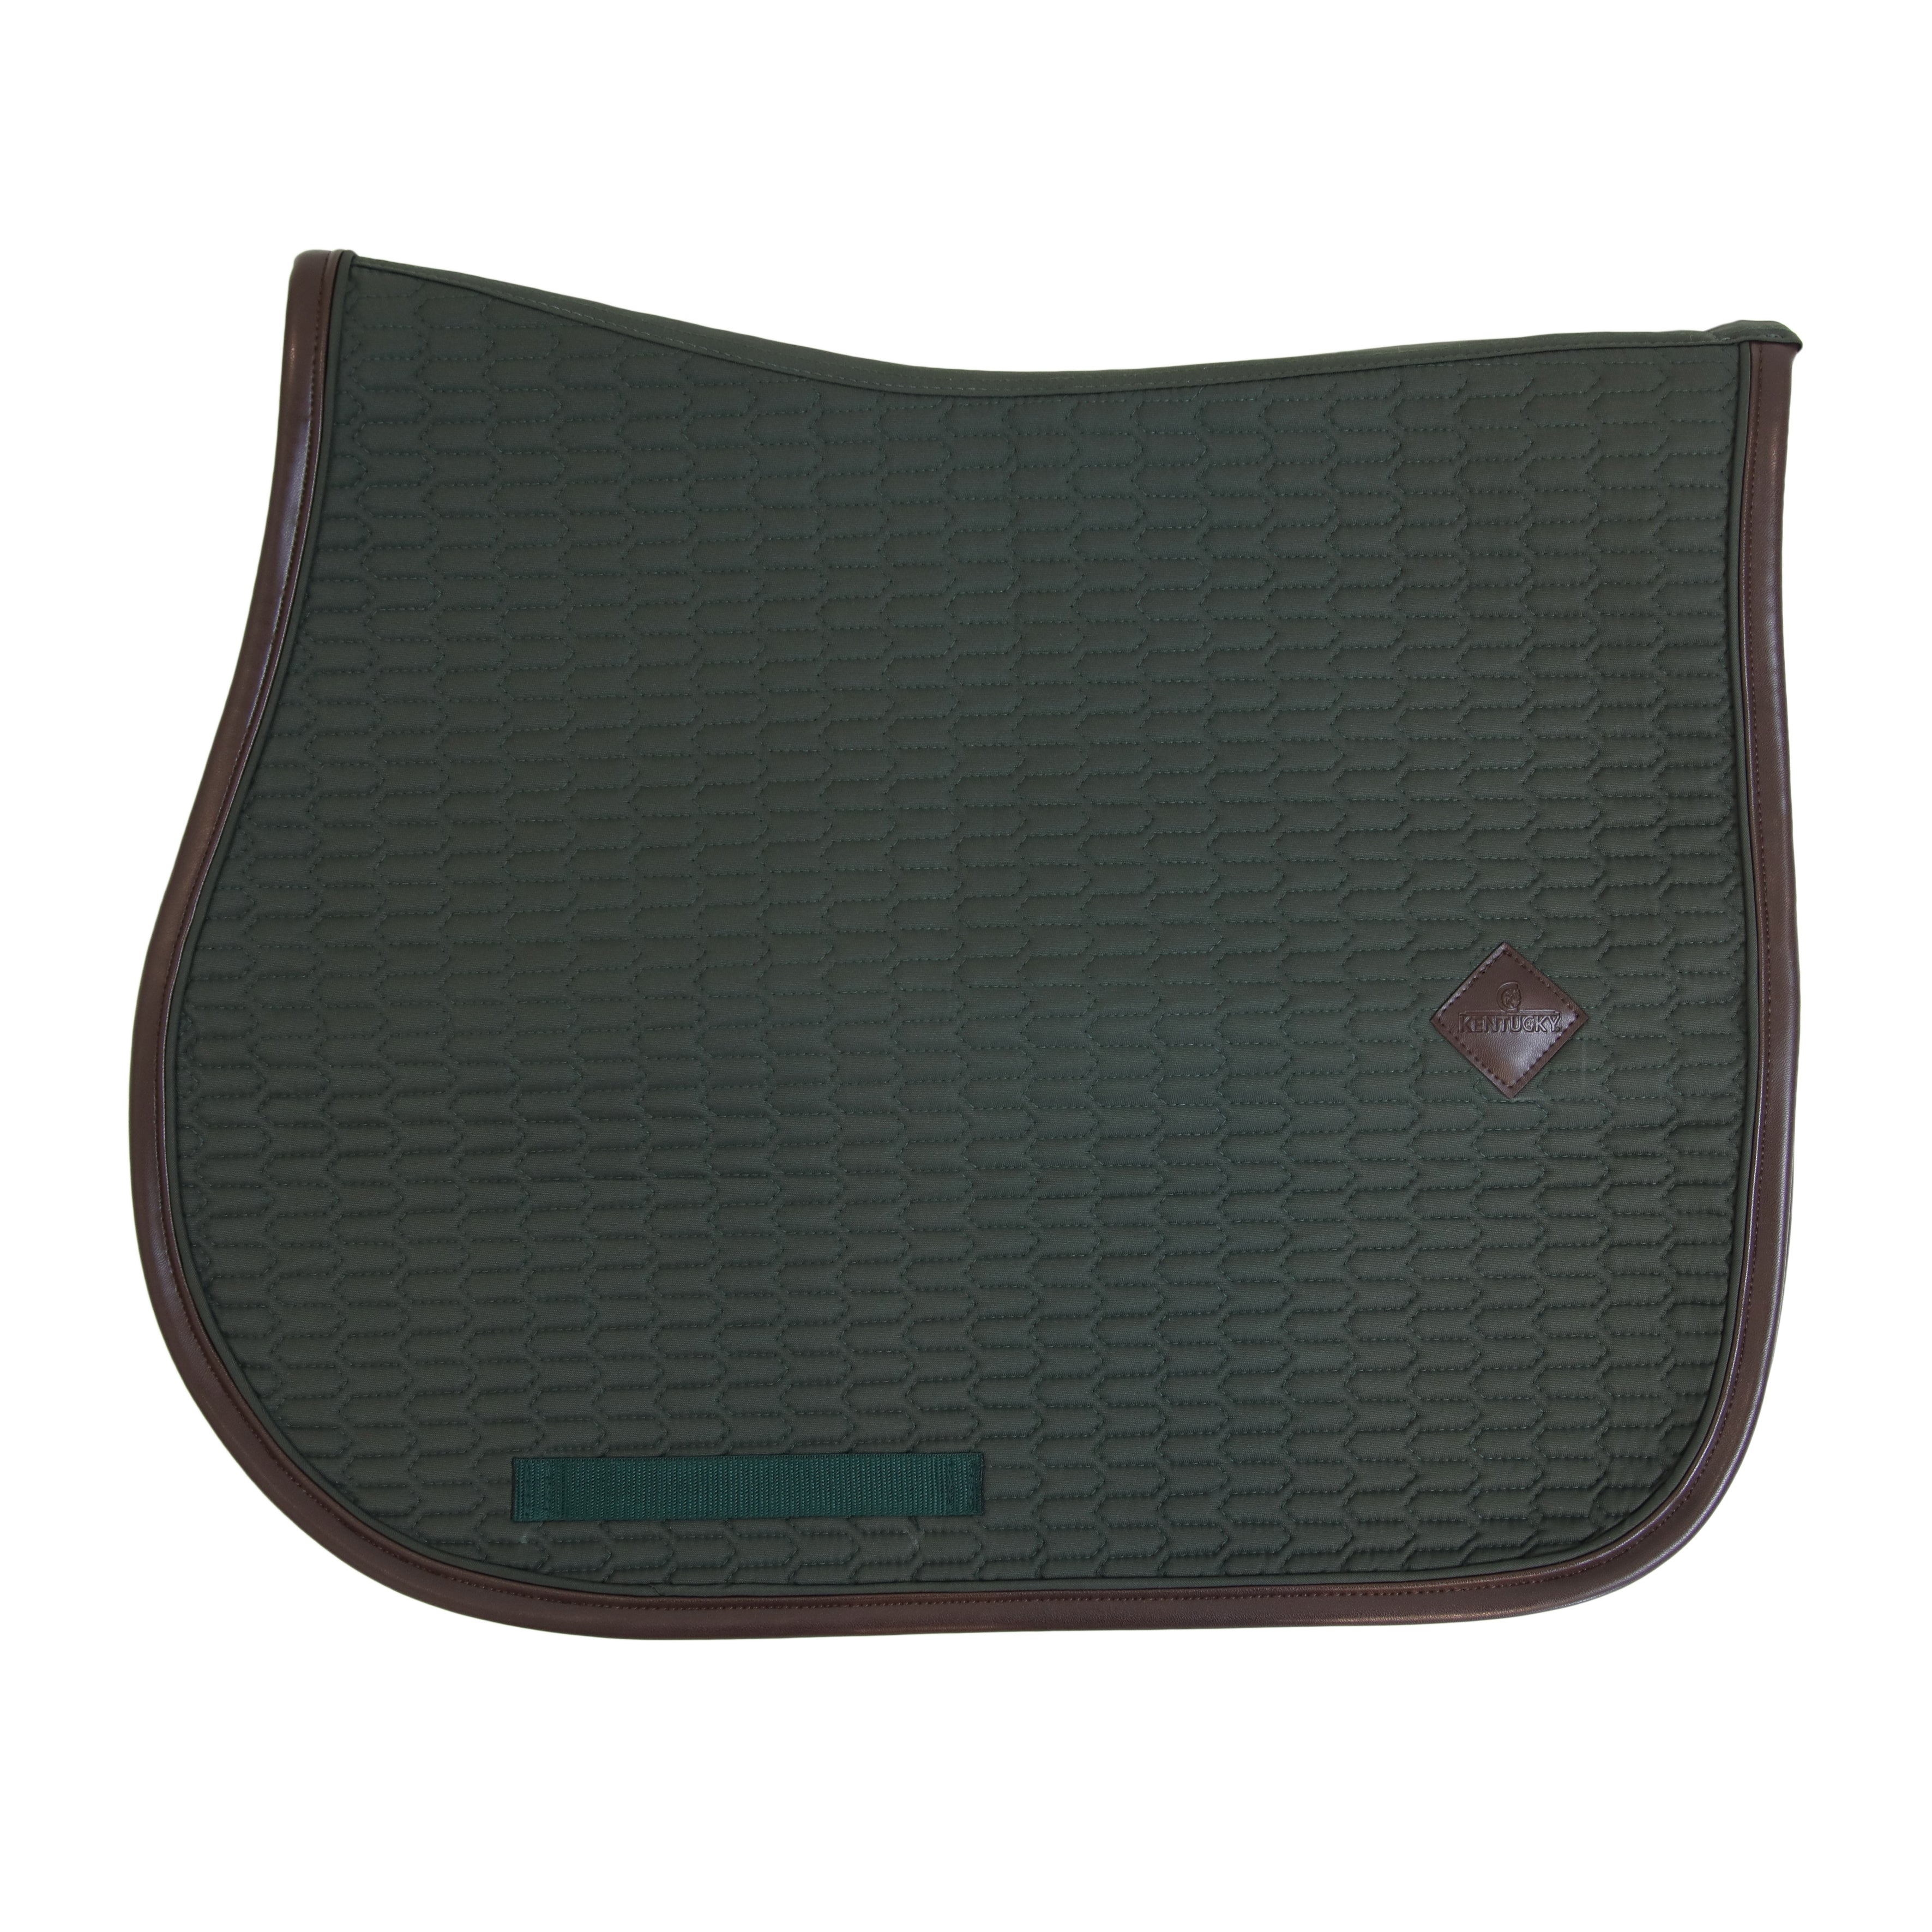 The Kentucky Saddle Pad colour Edition leather is a modern twist with the wave pattern on a classic pad.  The Kentucky pad is a very stylish and fashionable with an artificial leather binding (vegan friendly) and The Kentucky logo. The logo is always placed in a central, slightly higher place which leaves room for embroidery of your own logo if desired. 